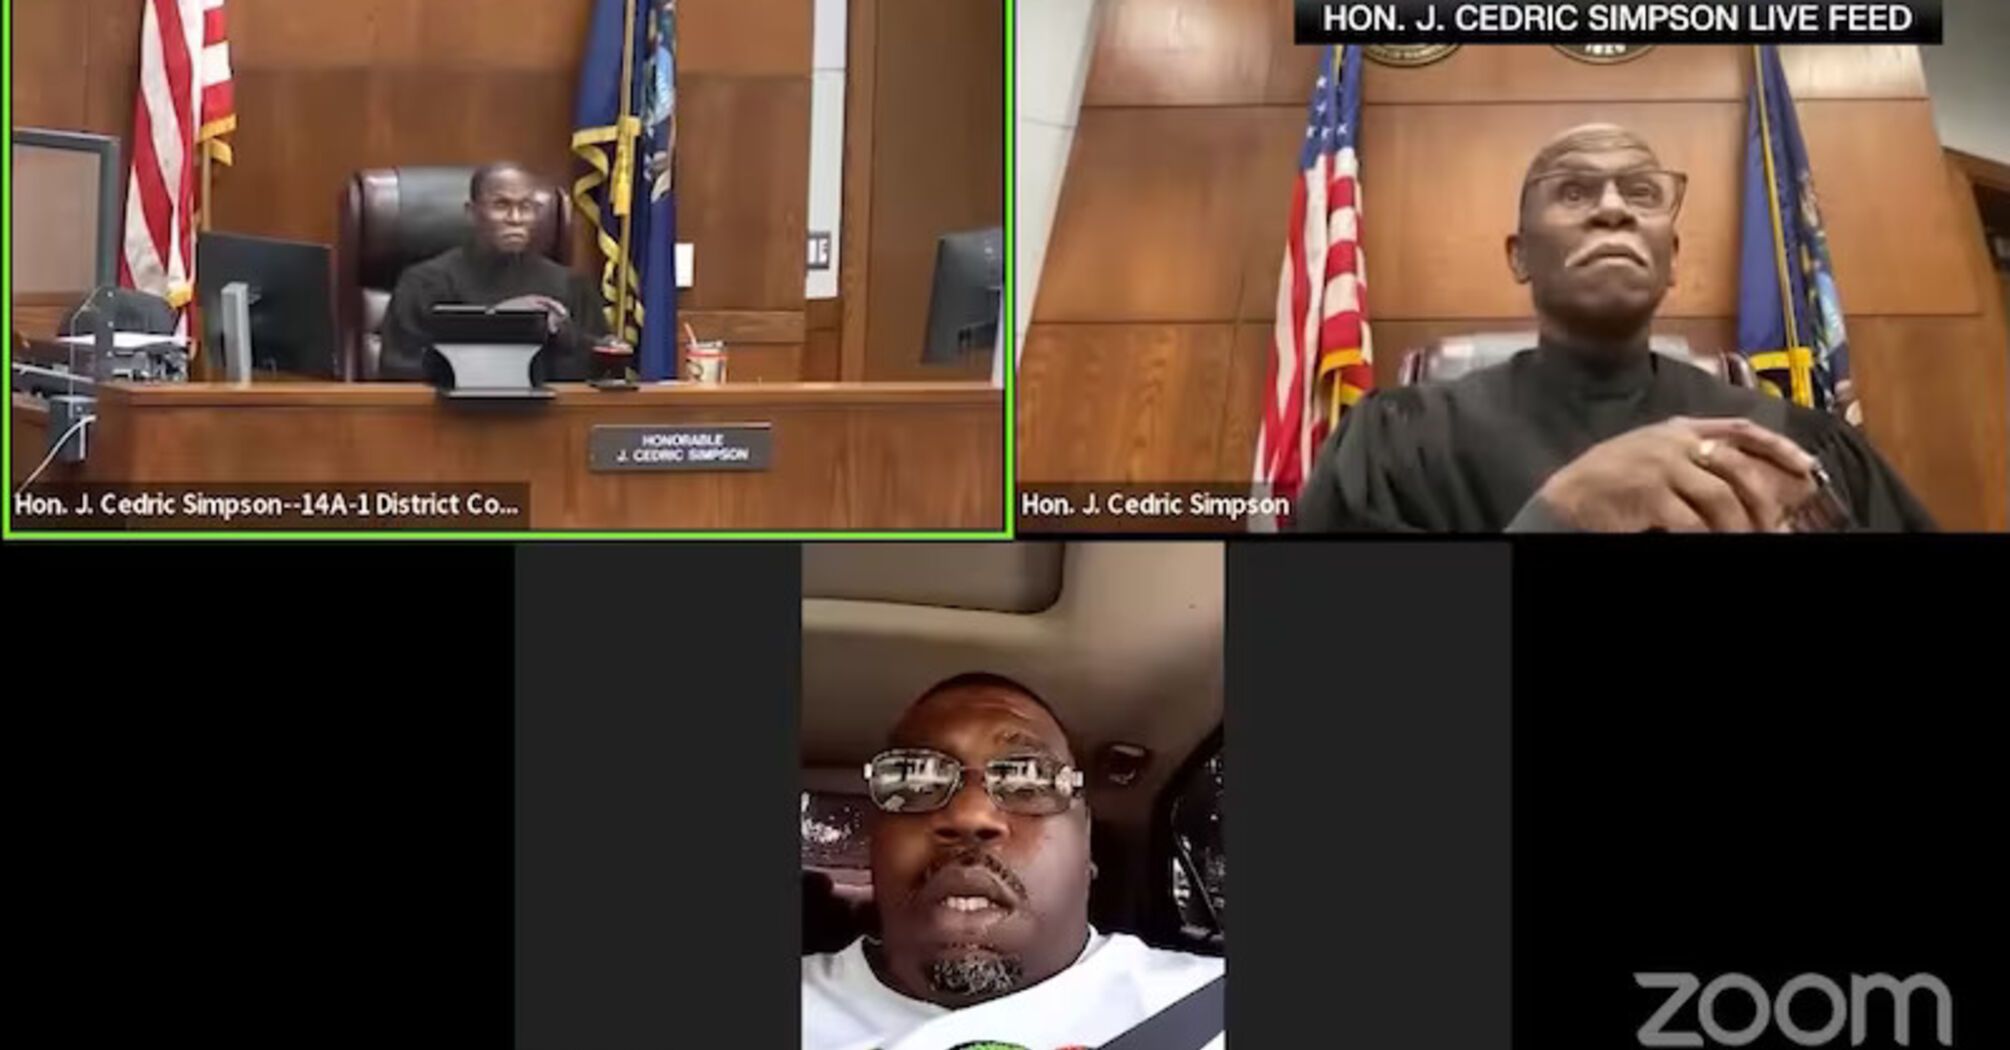 Appearance in online court meeting goes wrong